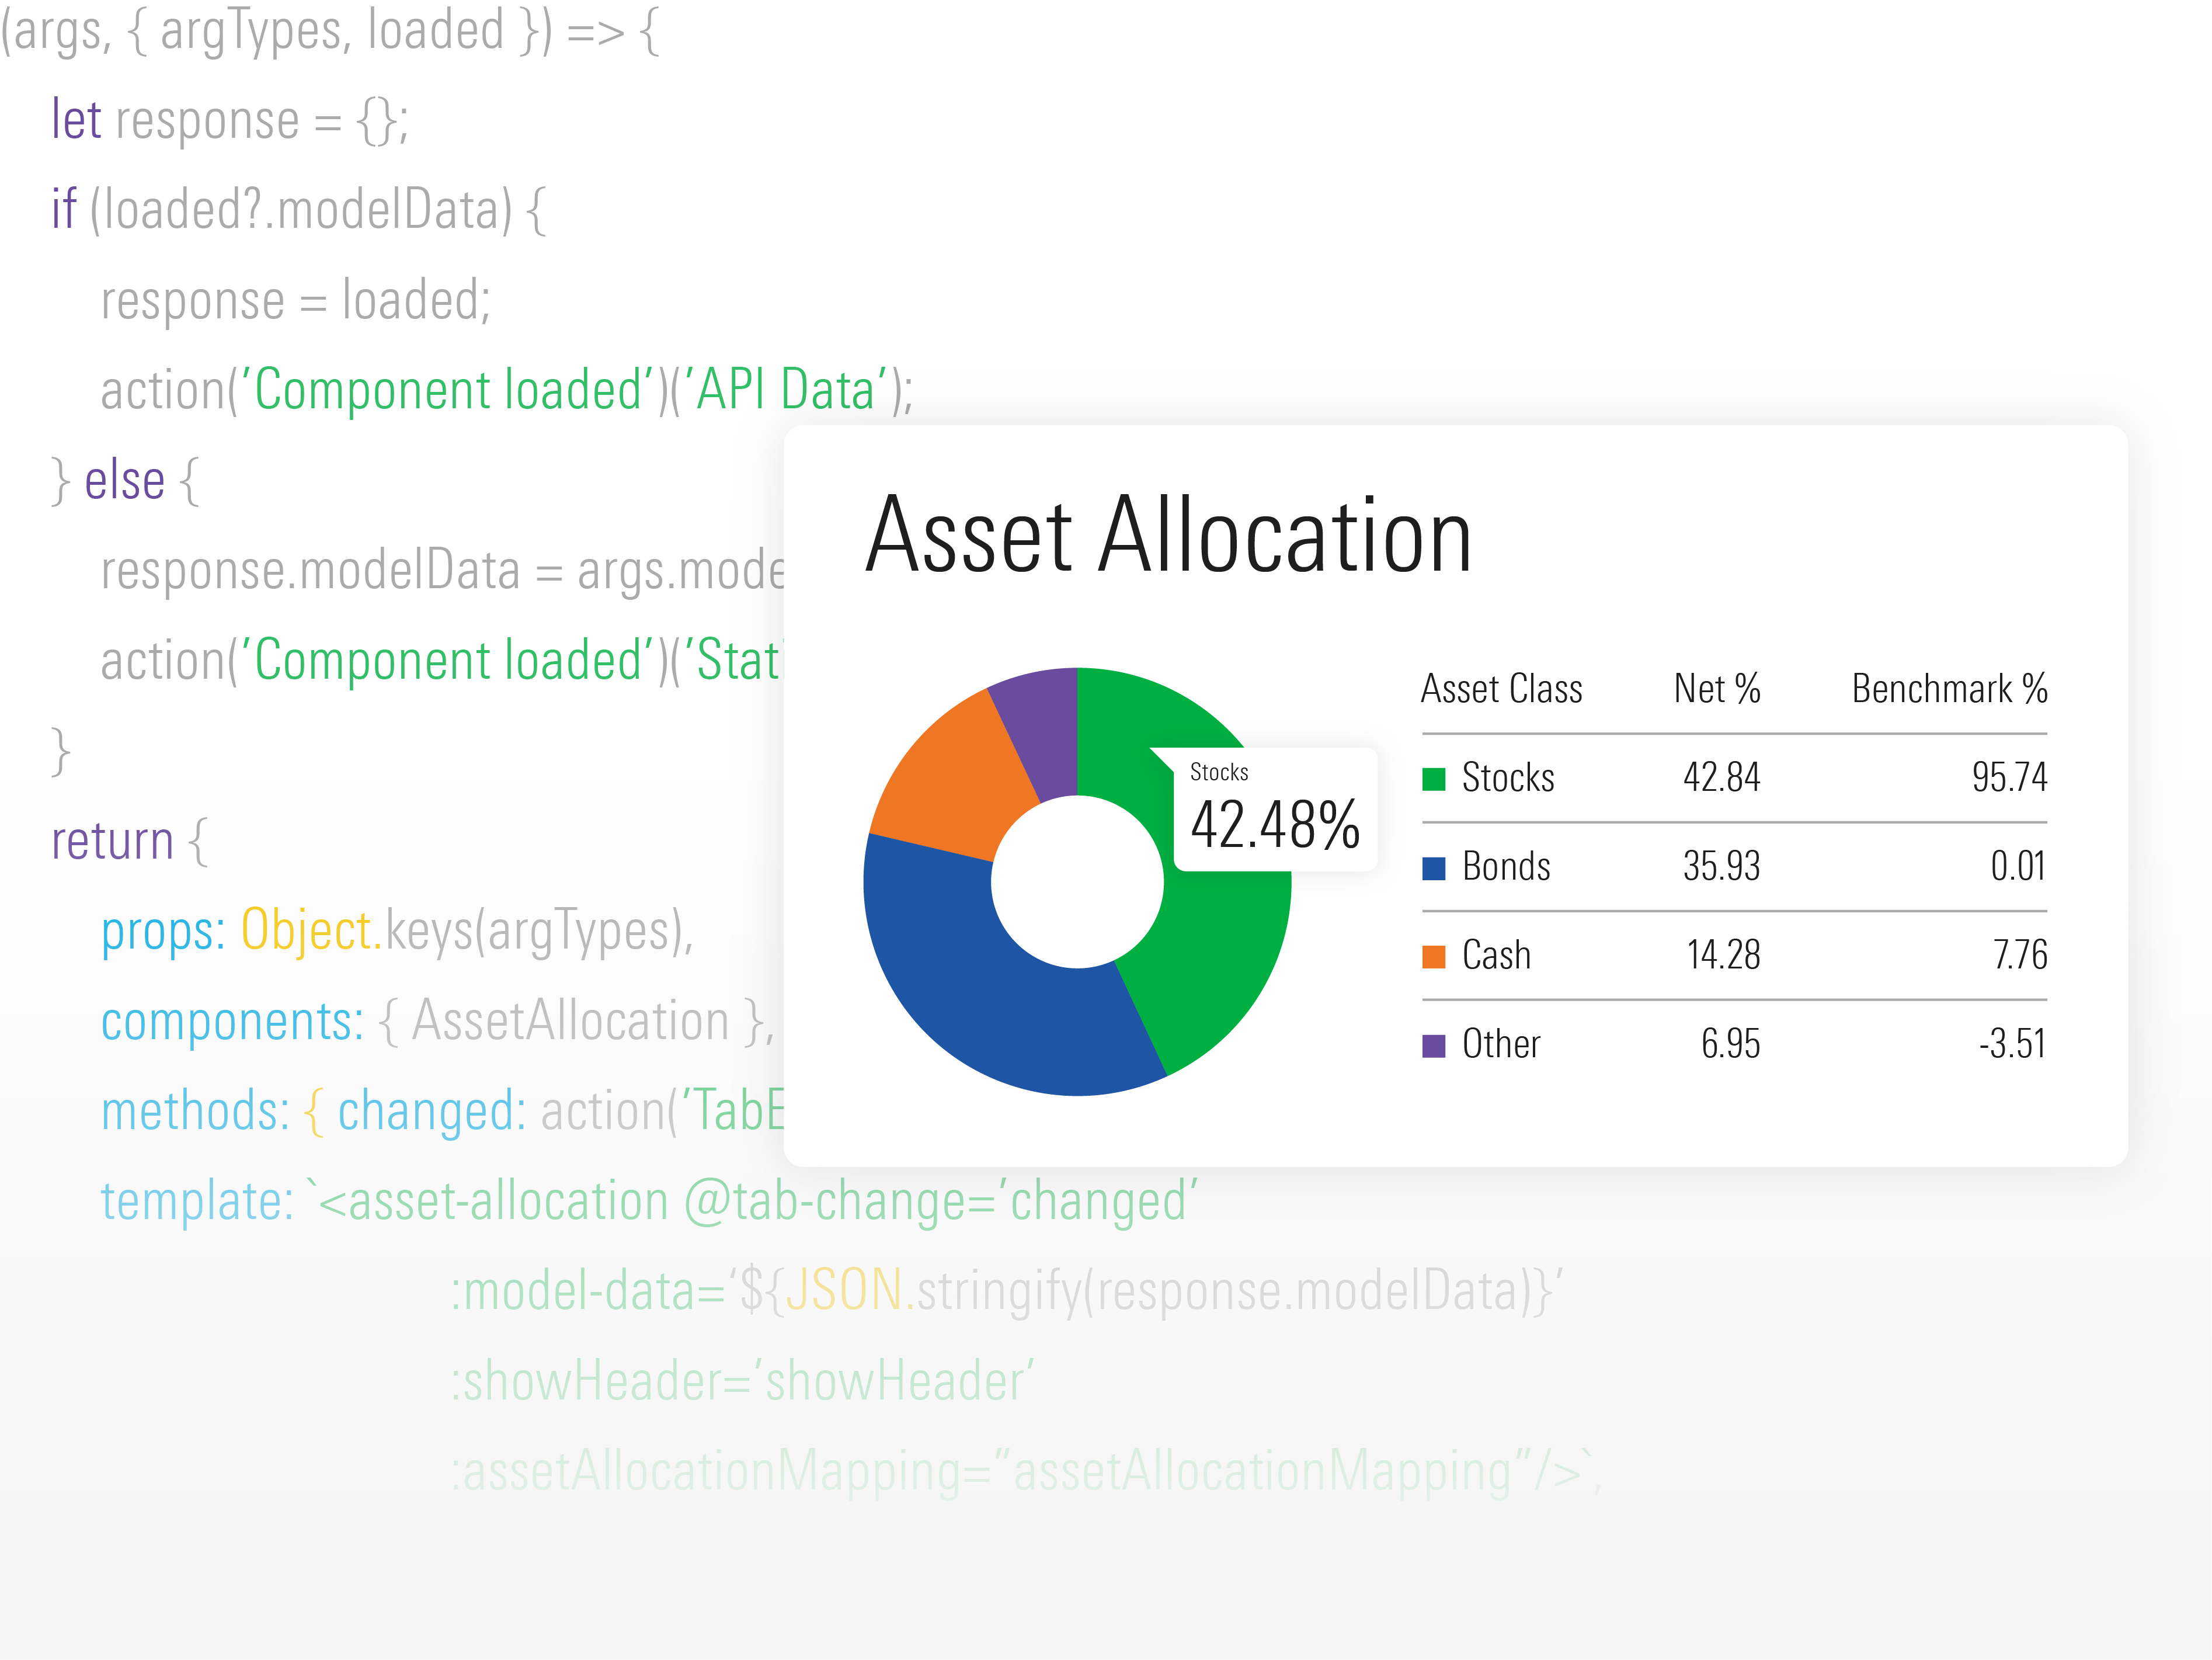 An illustration of the Portfolio Analysis API and how it displays the asset allocation of a portfolio. 